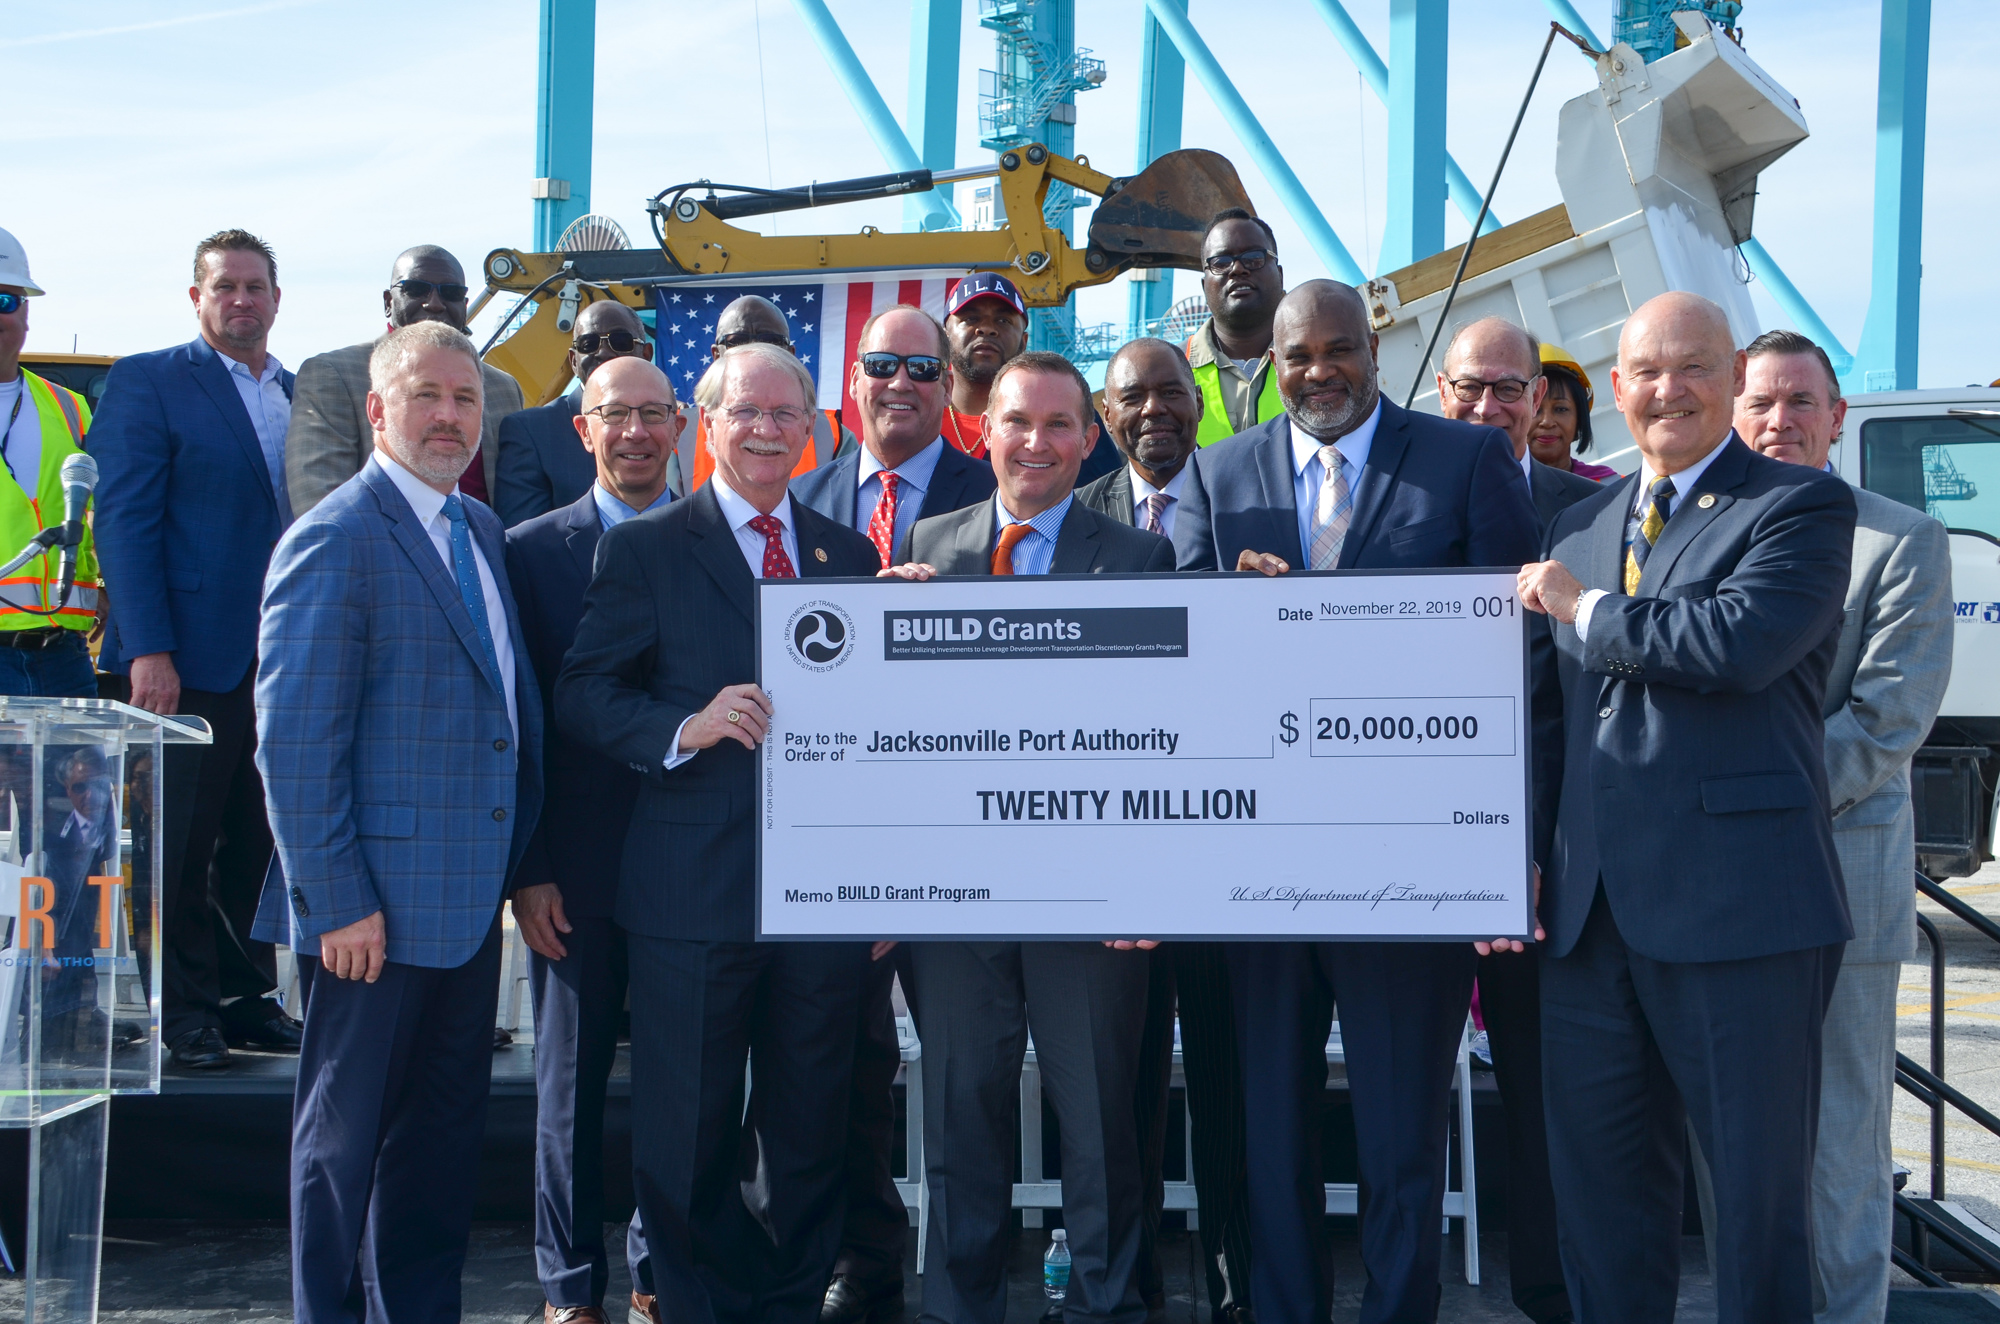 The Jacksonville Port Authority was presented with a $20 million check that will fund terminal enhancements.